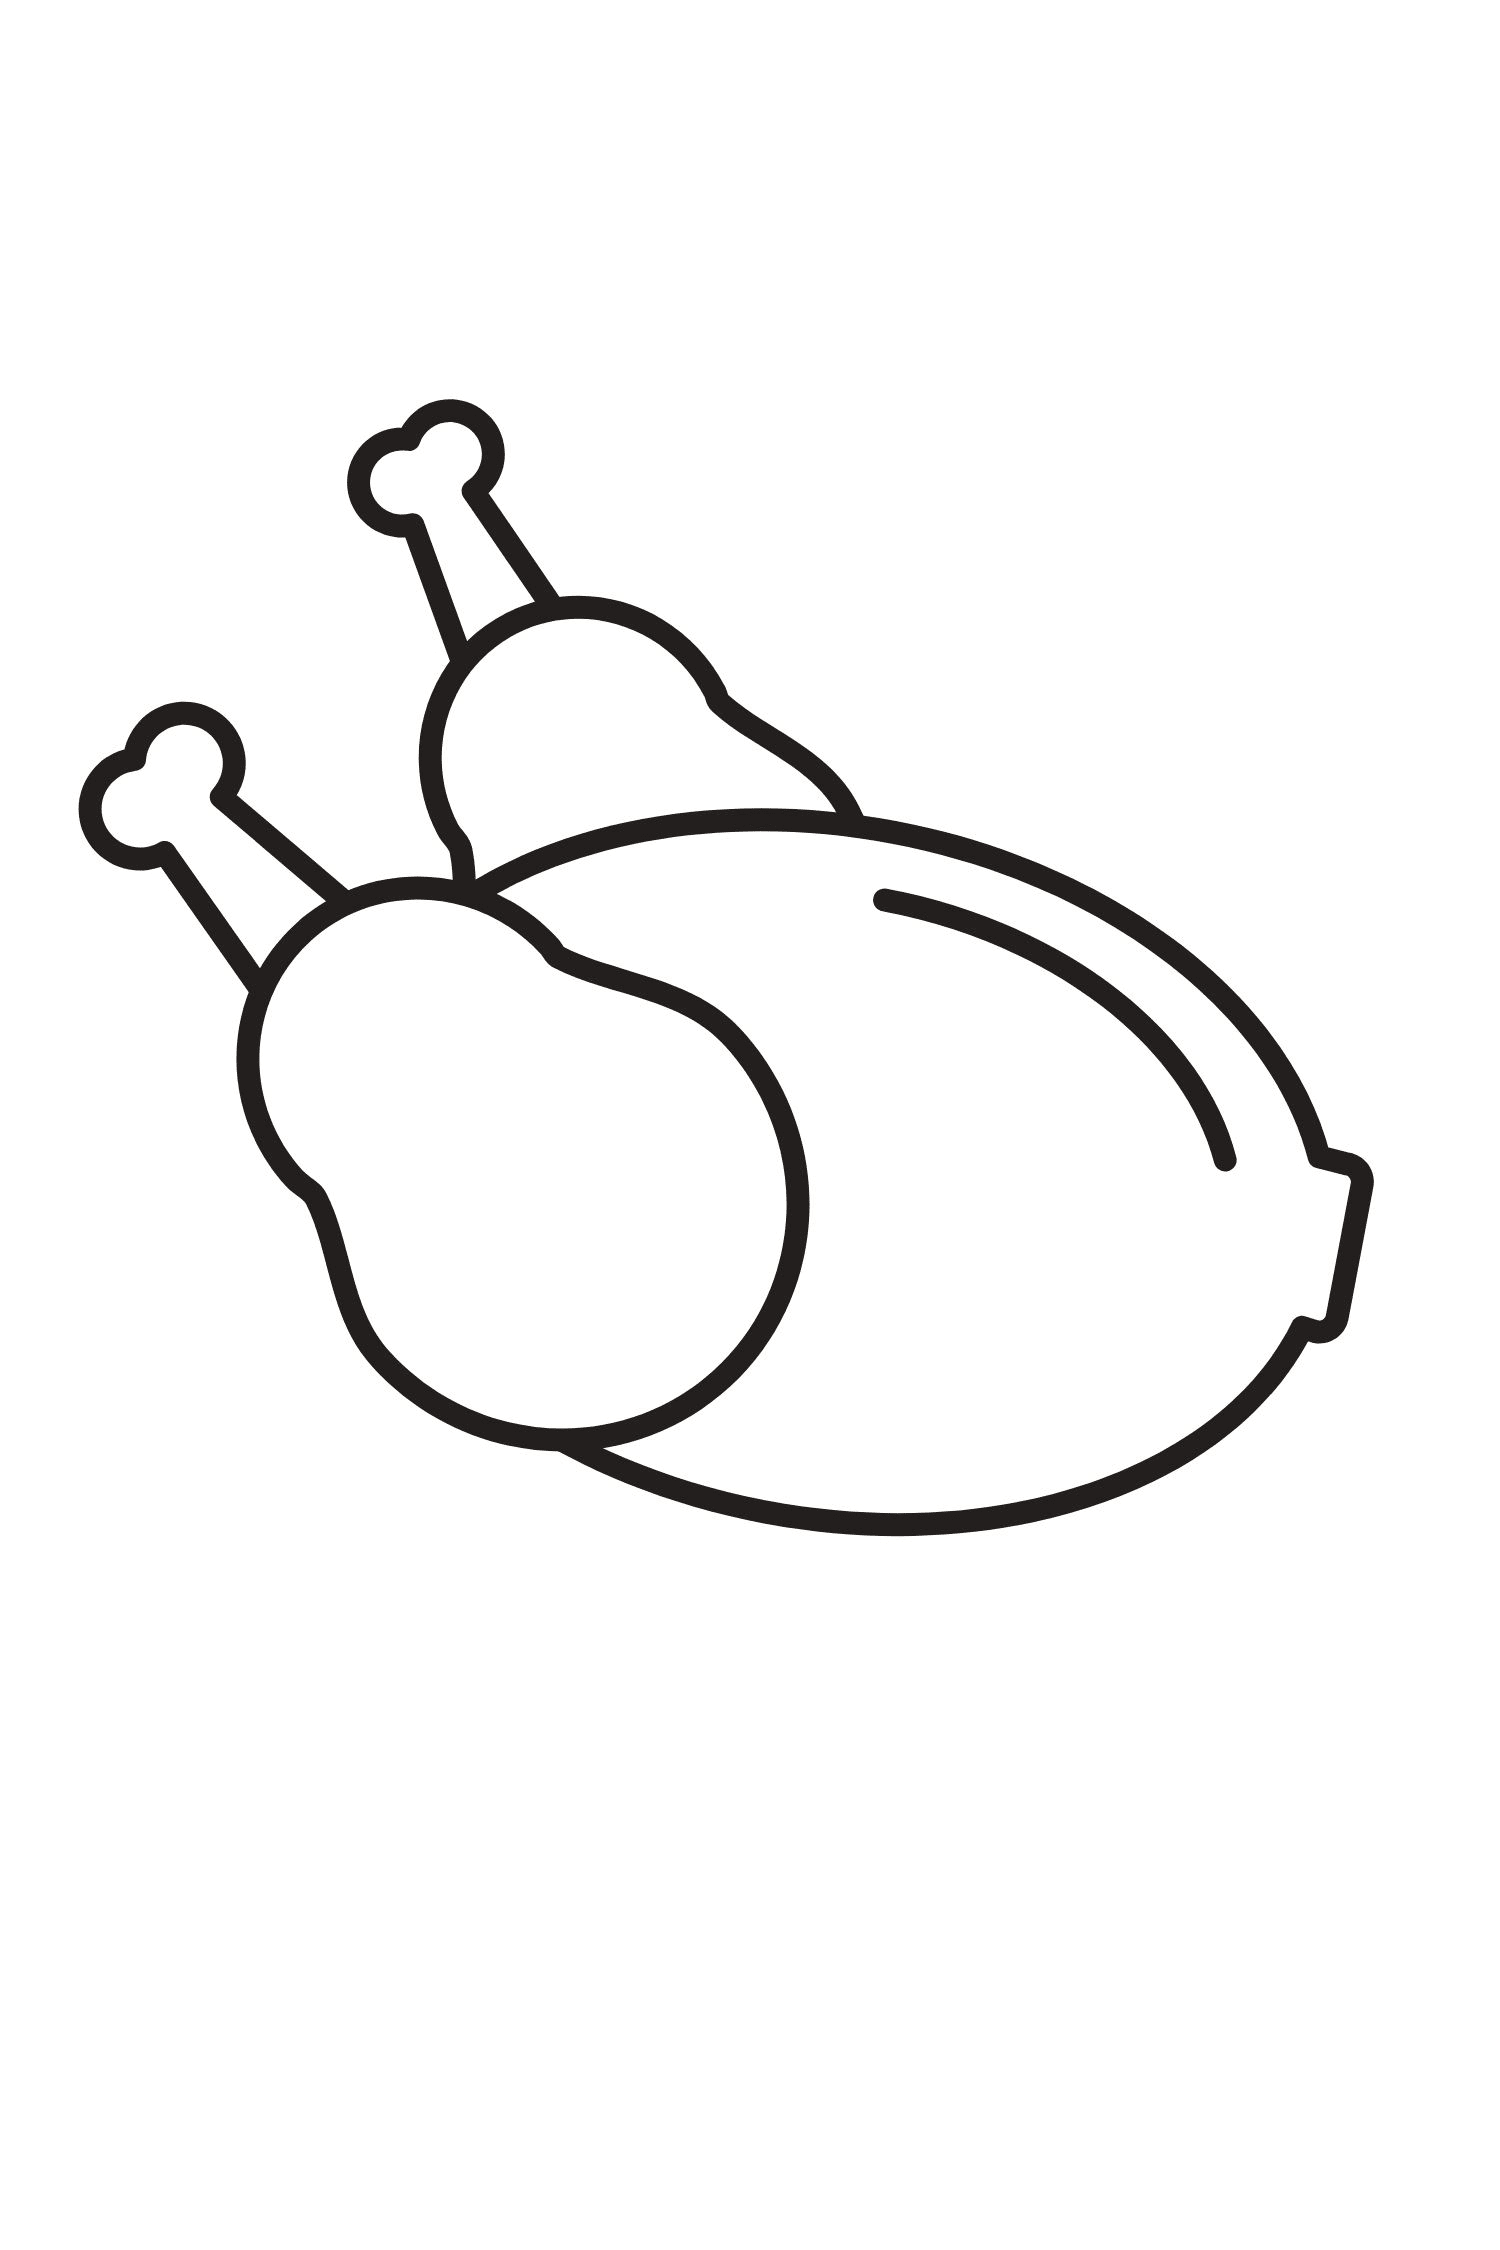 Turkey Dinner Coloring Page